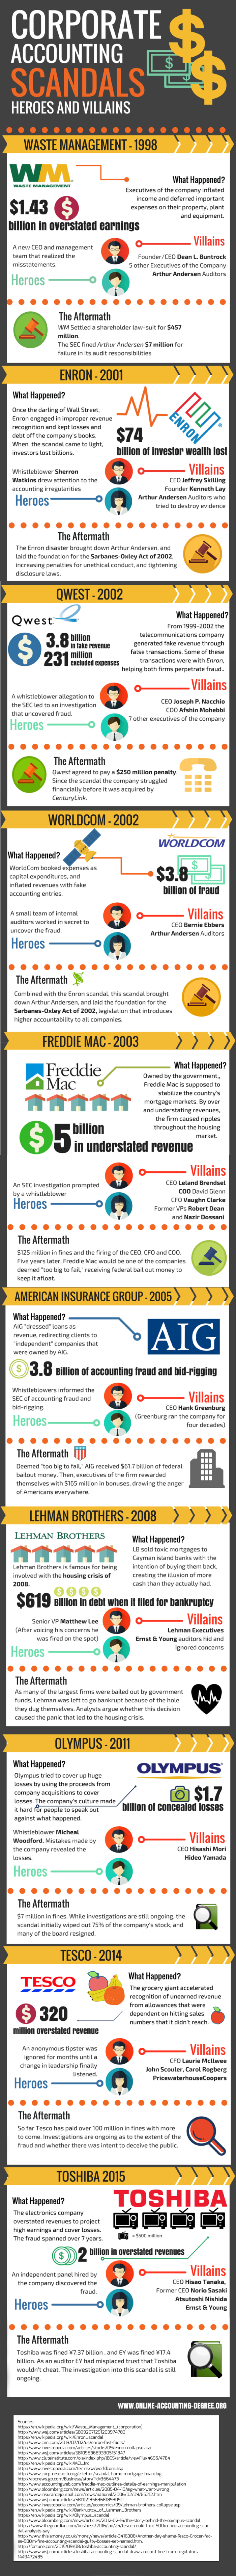 10 of the Biggest Corporate Accounting Scandals of All Time